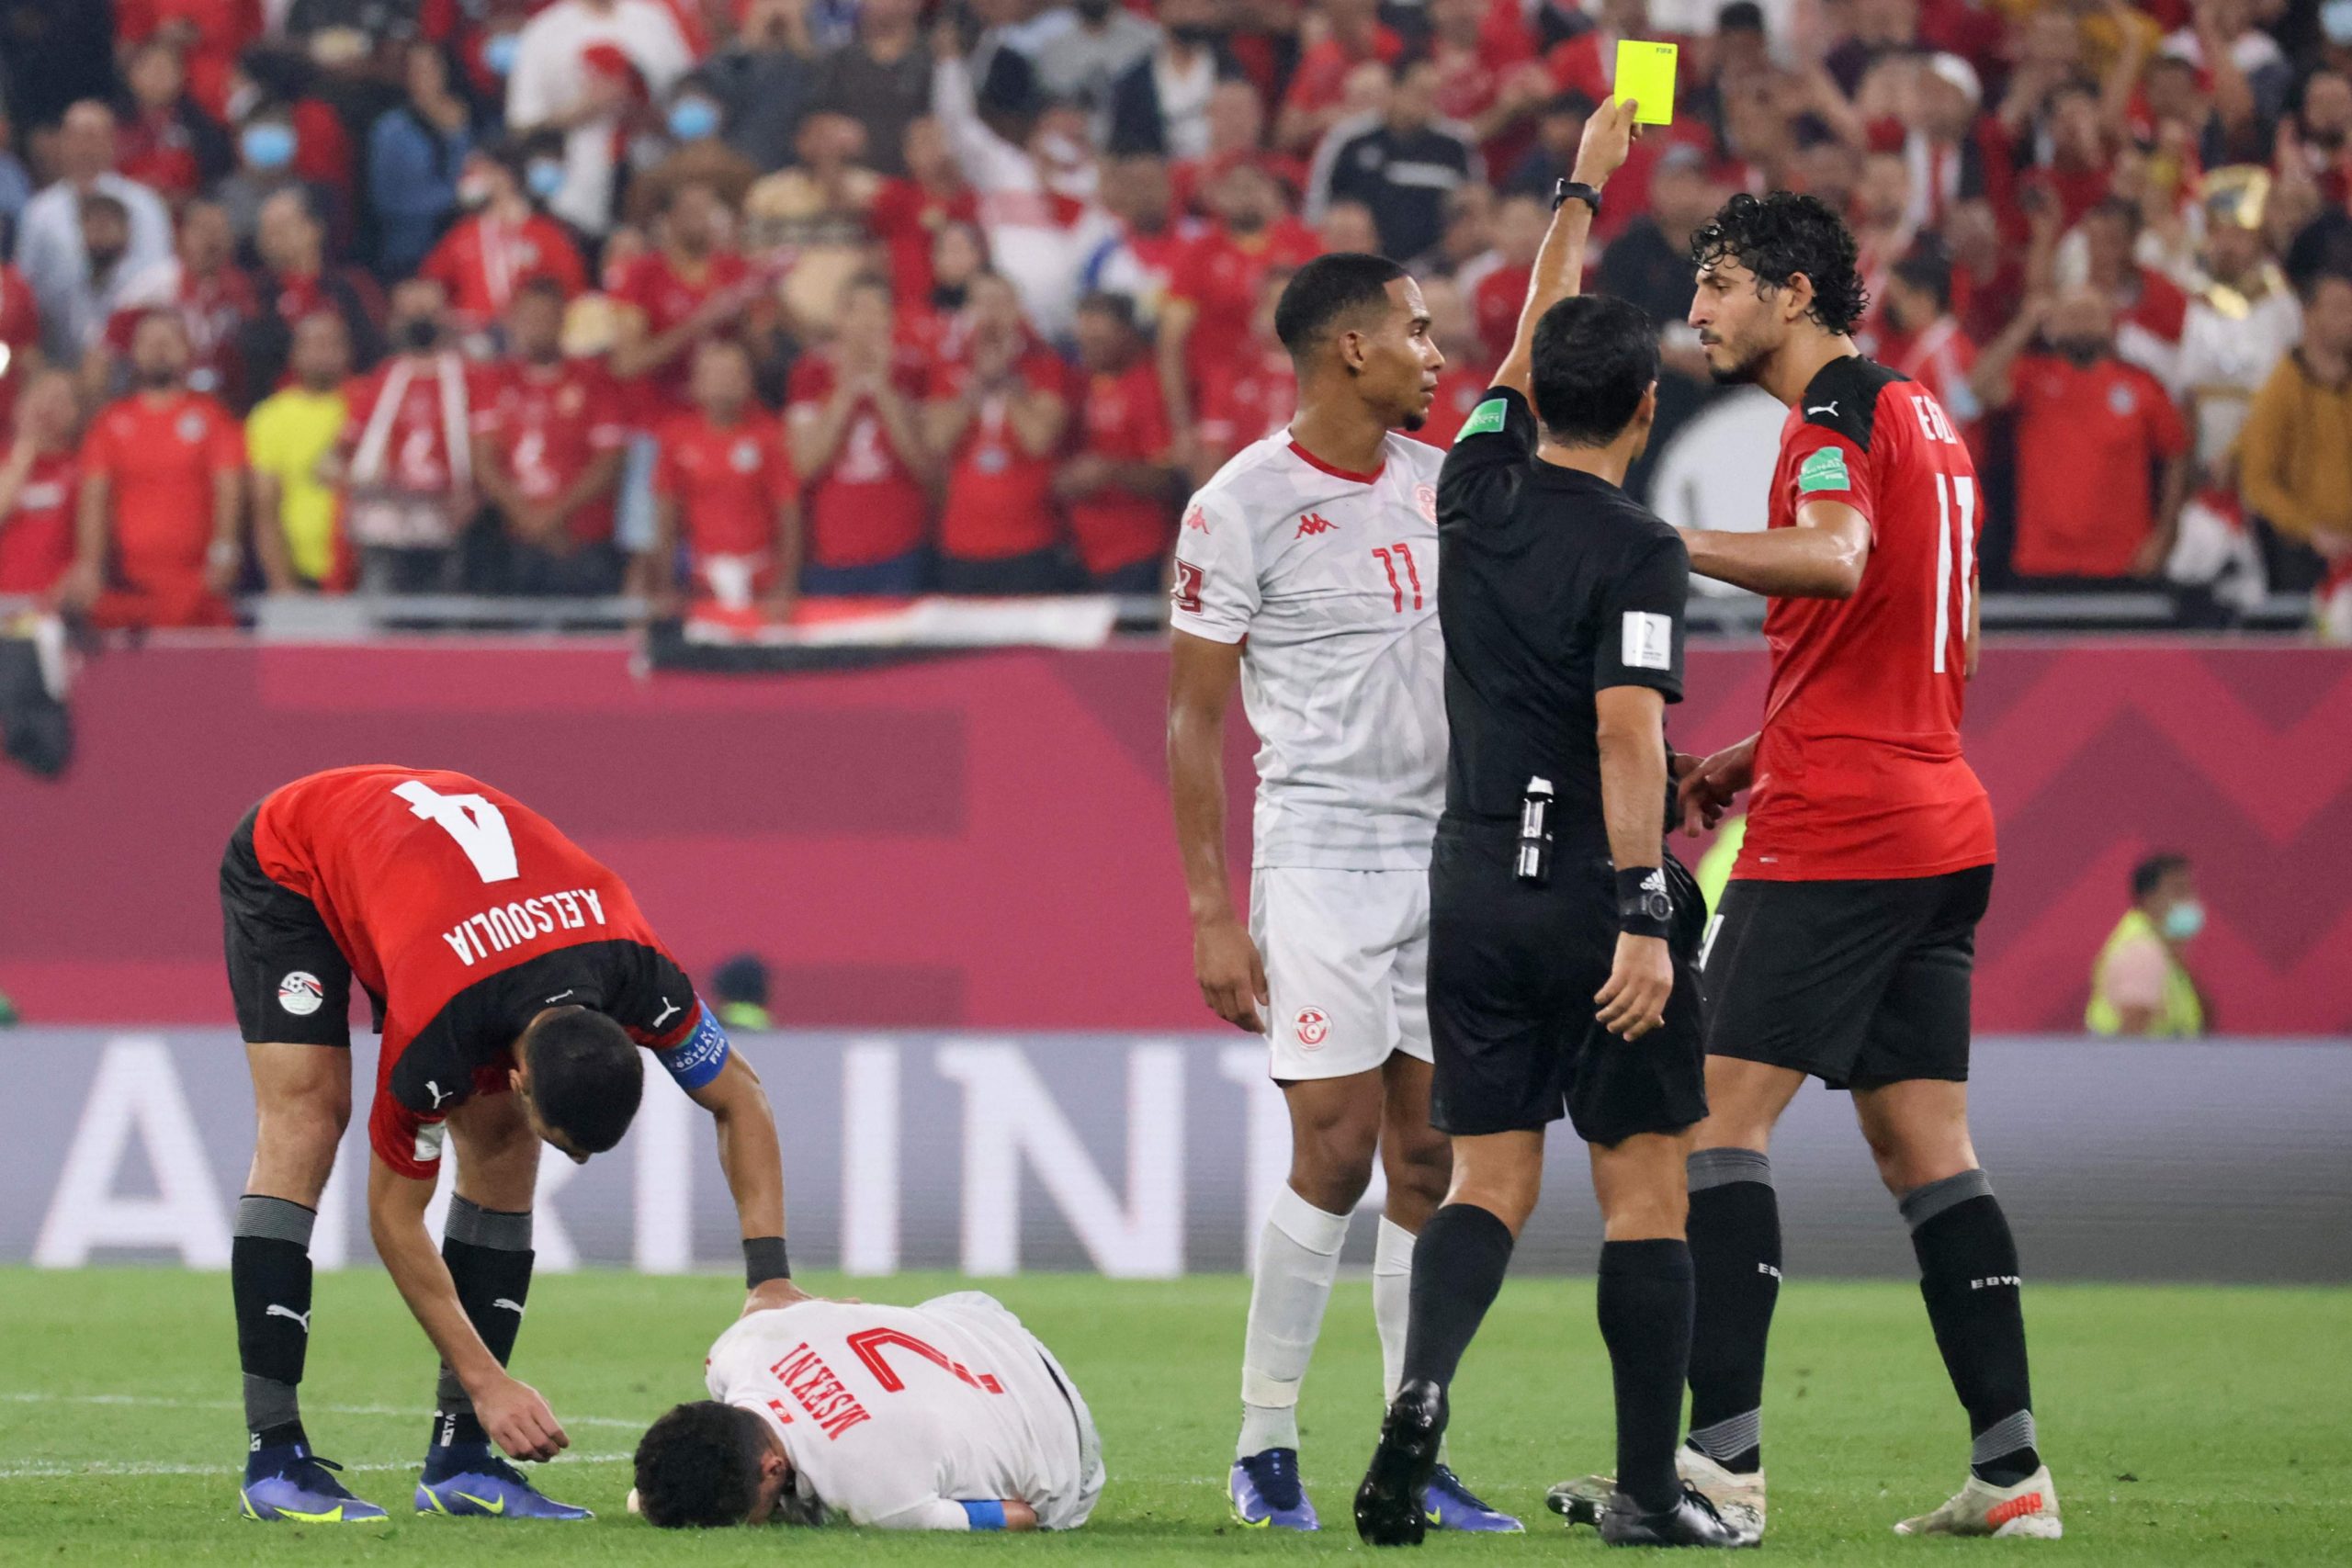 Arab Cup: Tunisia Reaches the Final After Beating Egypt